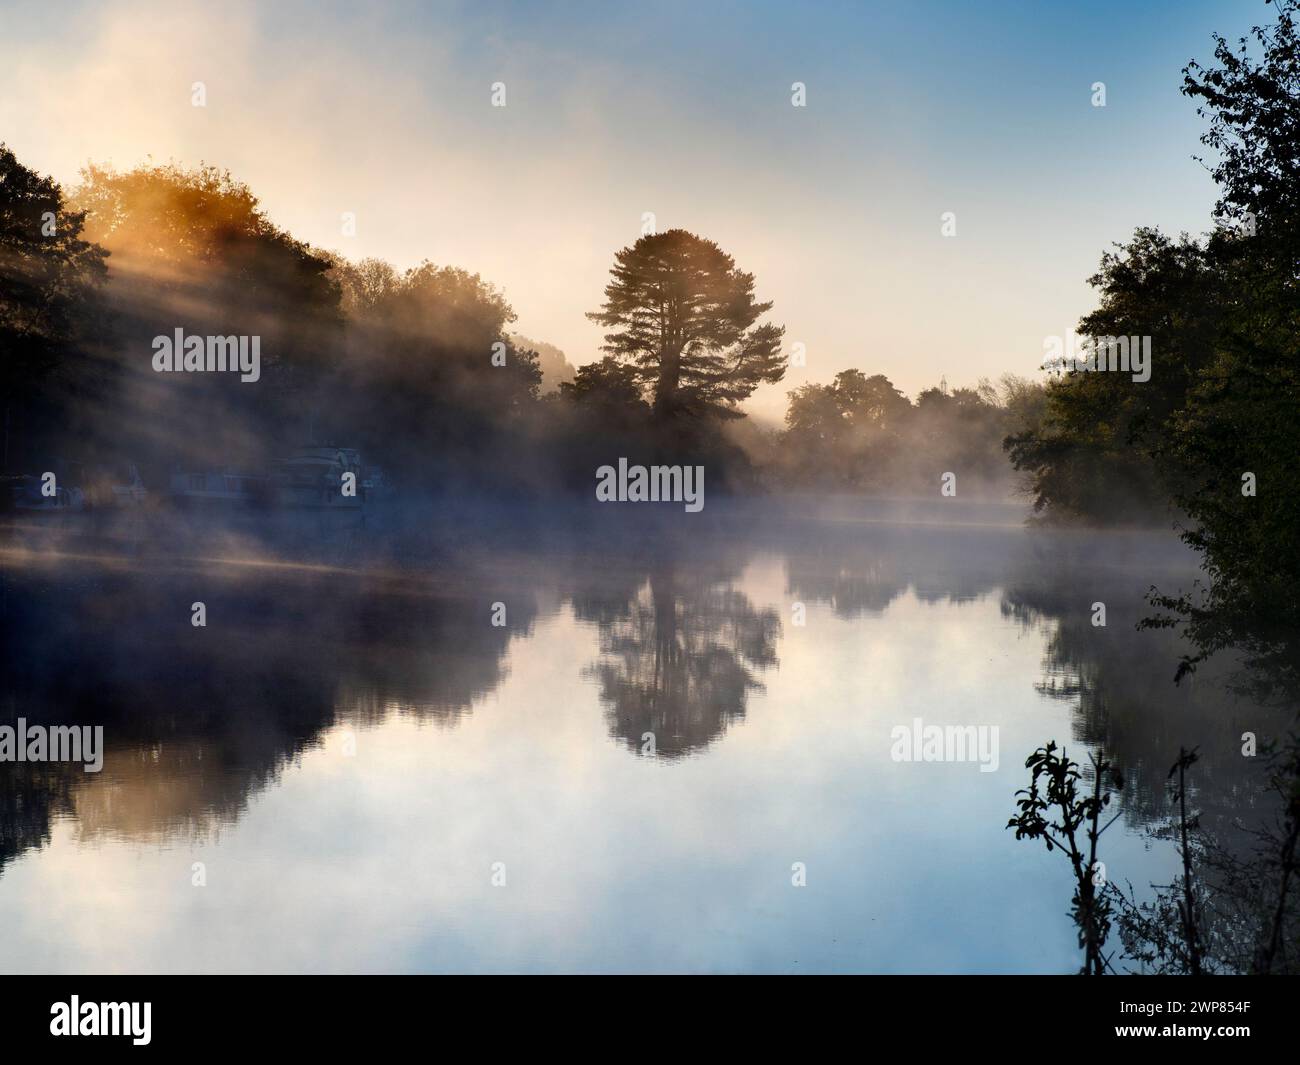 Here we see a line of pleasure boats moored by the Thames by Kennington, just outside Oxford. It's a misty Autumn sunrise. Seen from Thames Path - a w Stock Photo